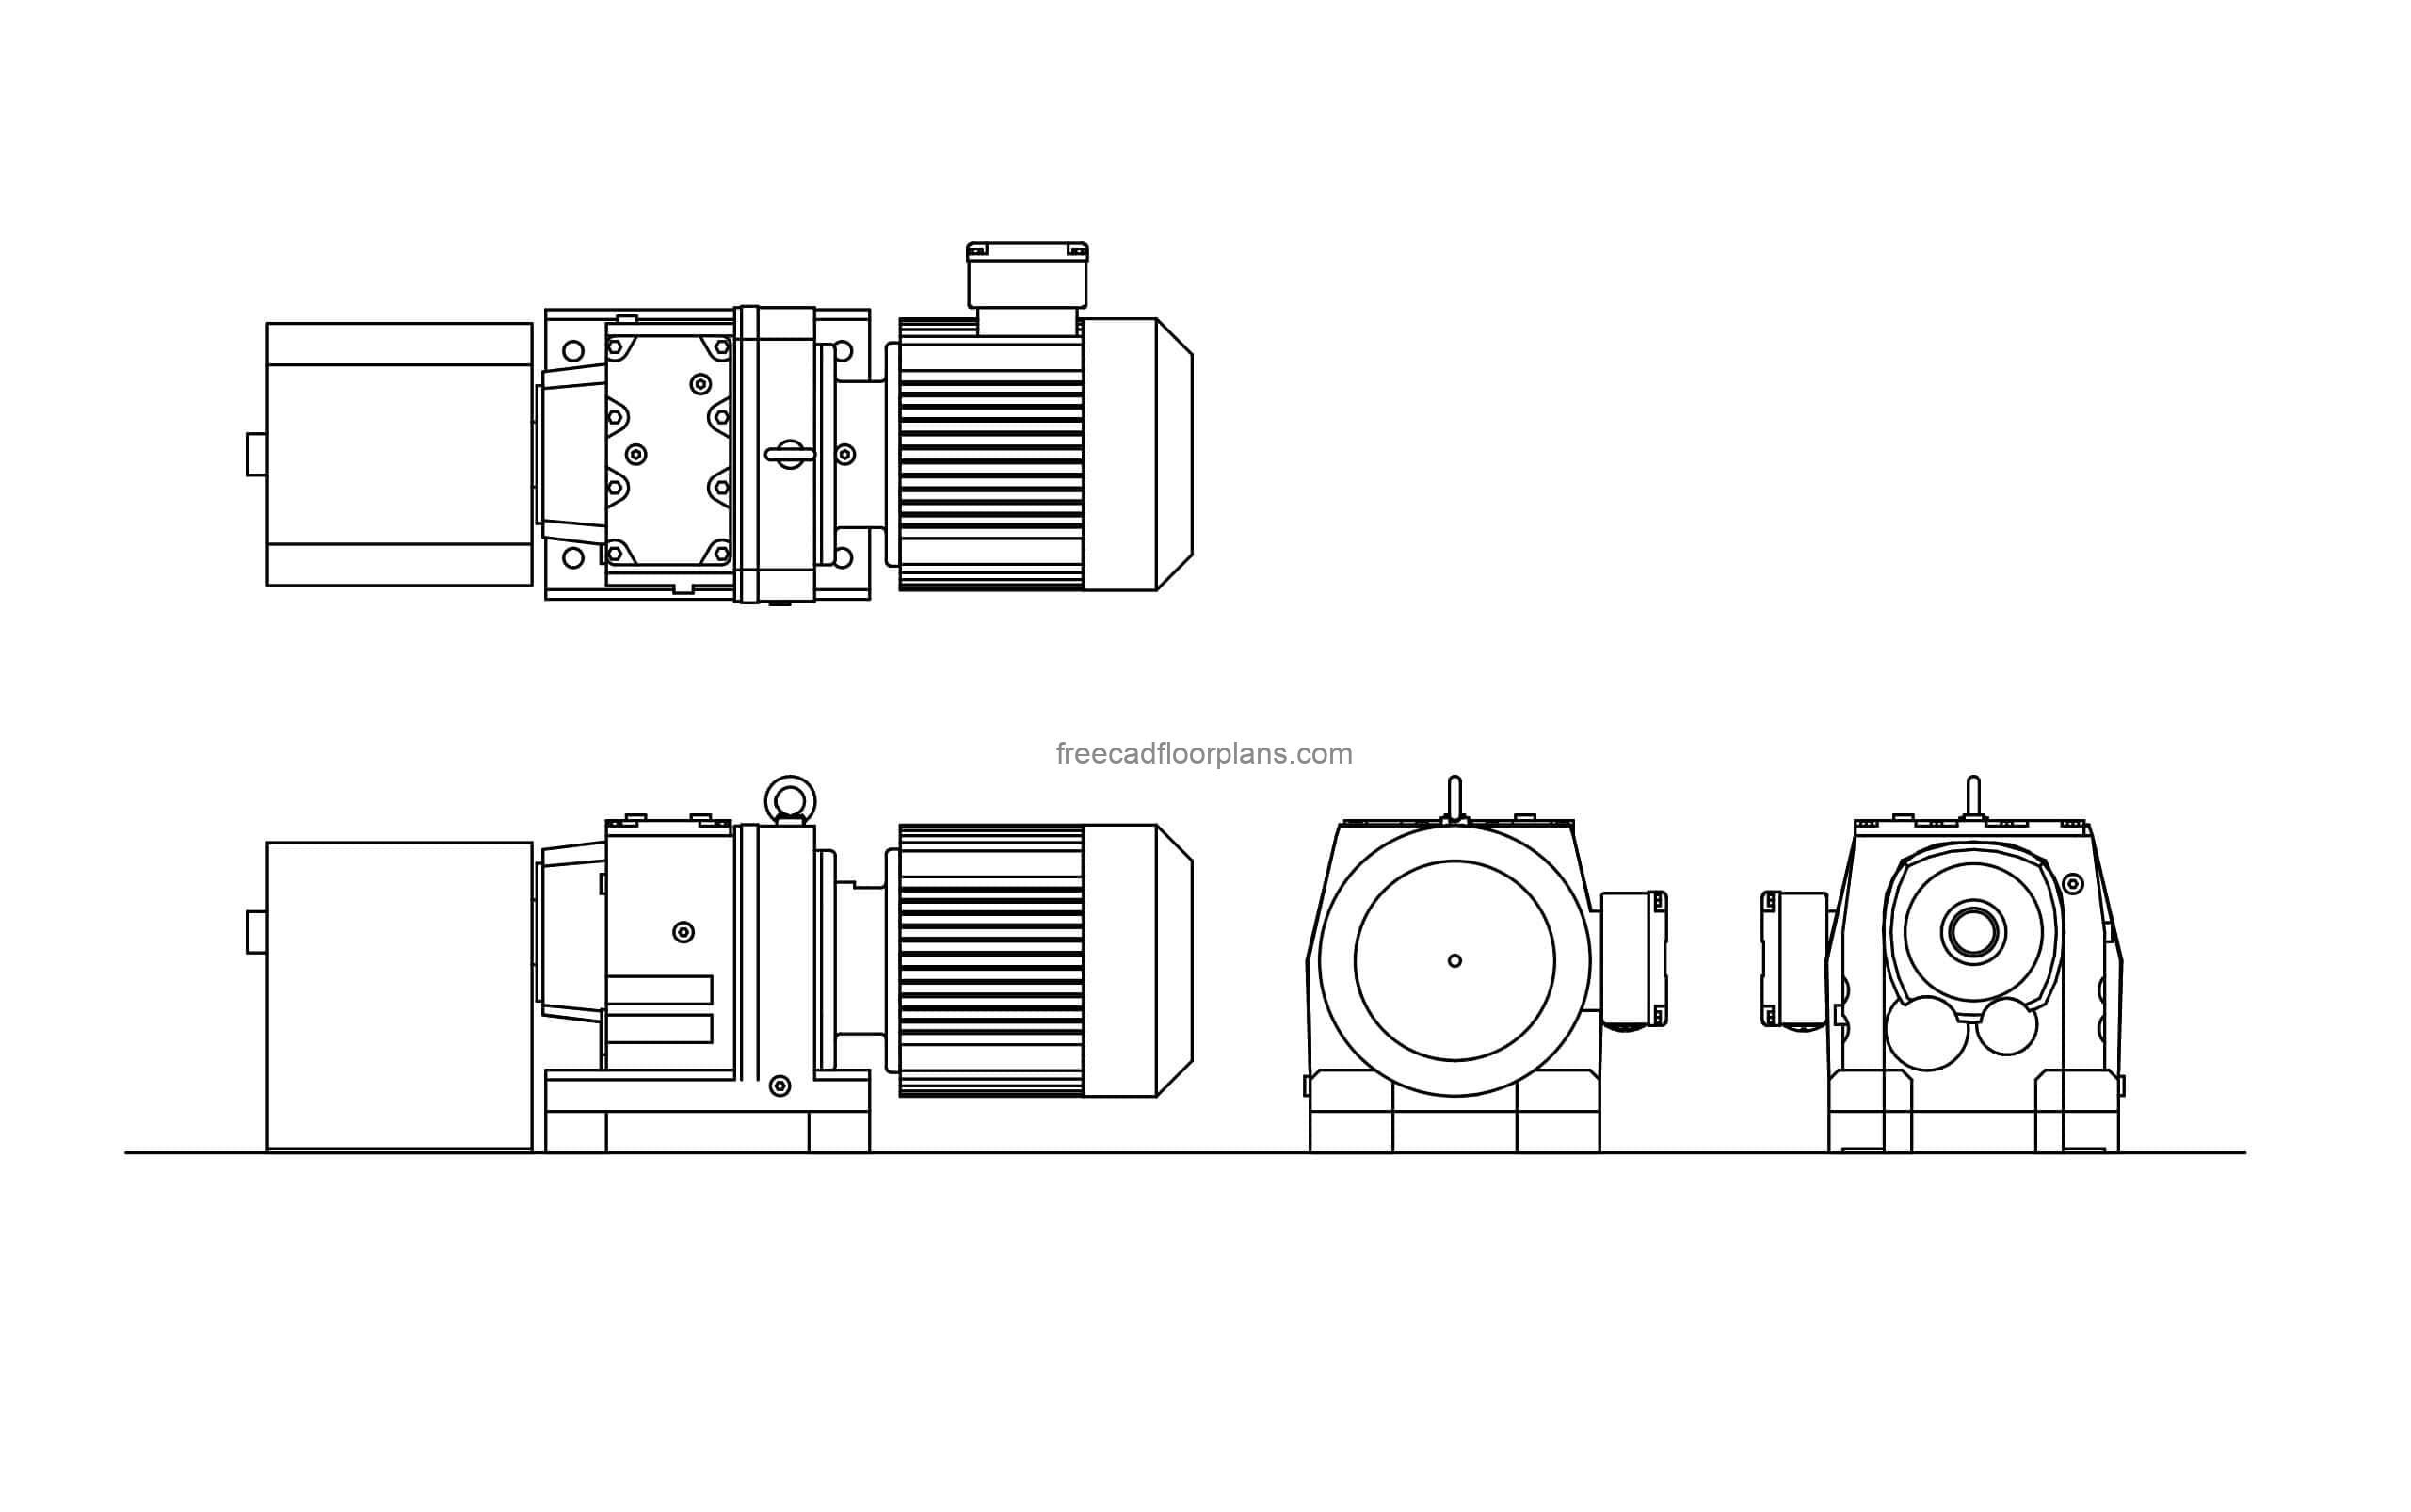 dwg cad block drawing with all 2d views of a booster pump dwg file for free download